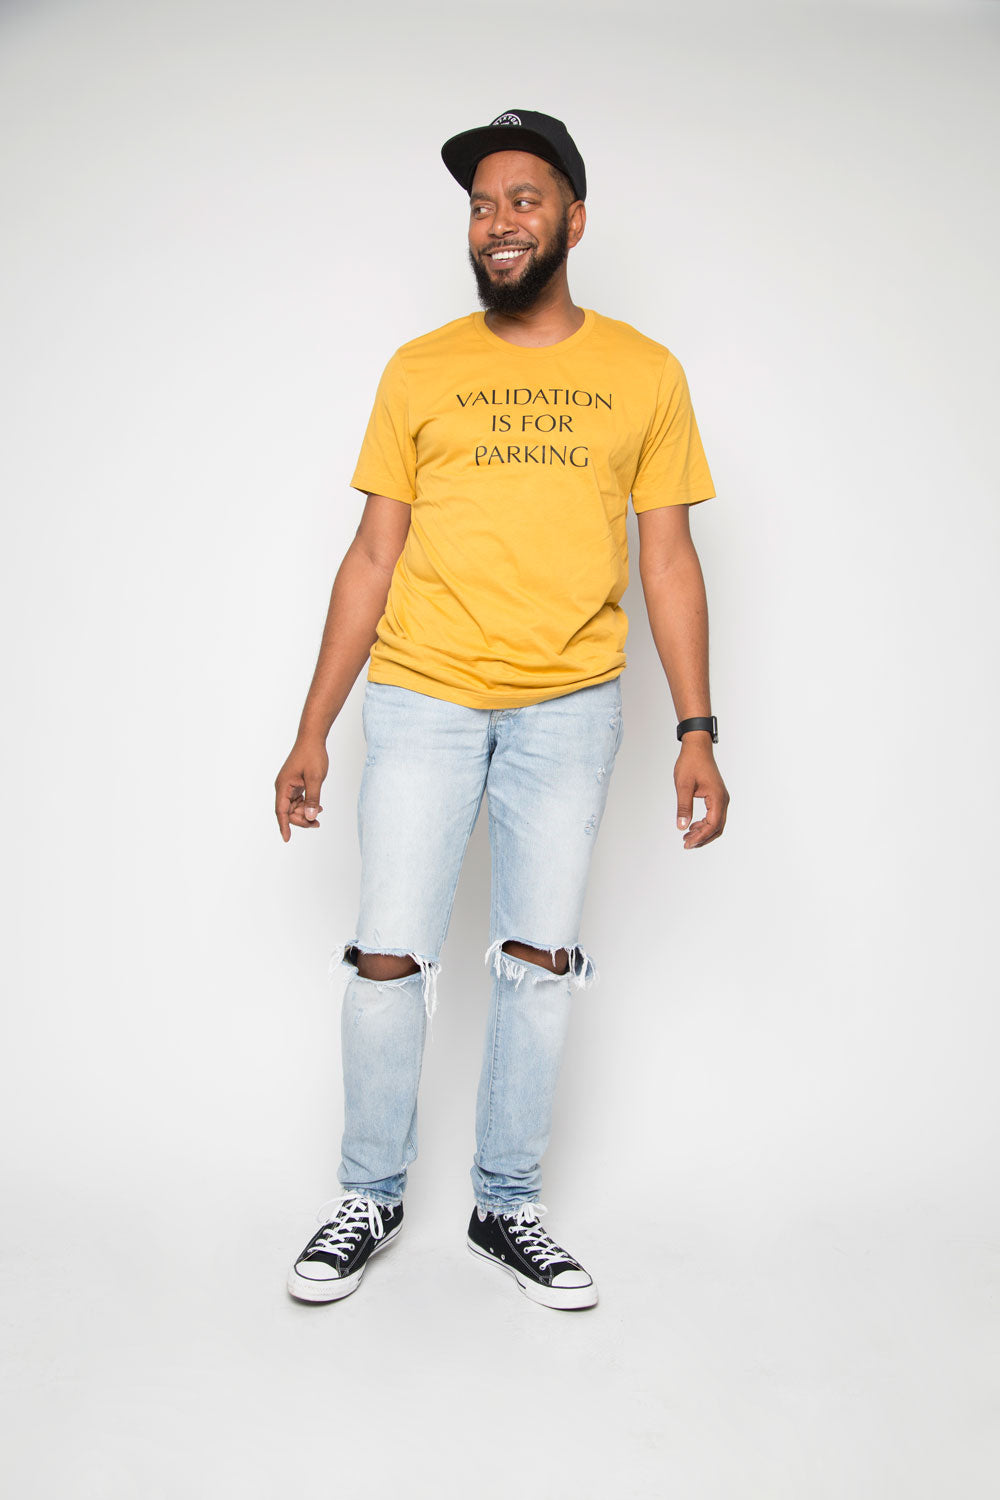 Validation Is For Parking Shirt in Mustard - Trunk Series